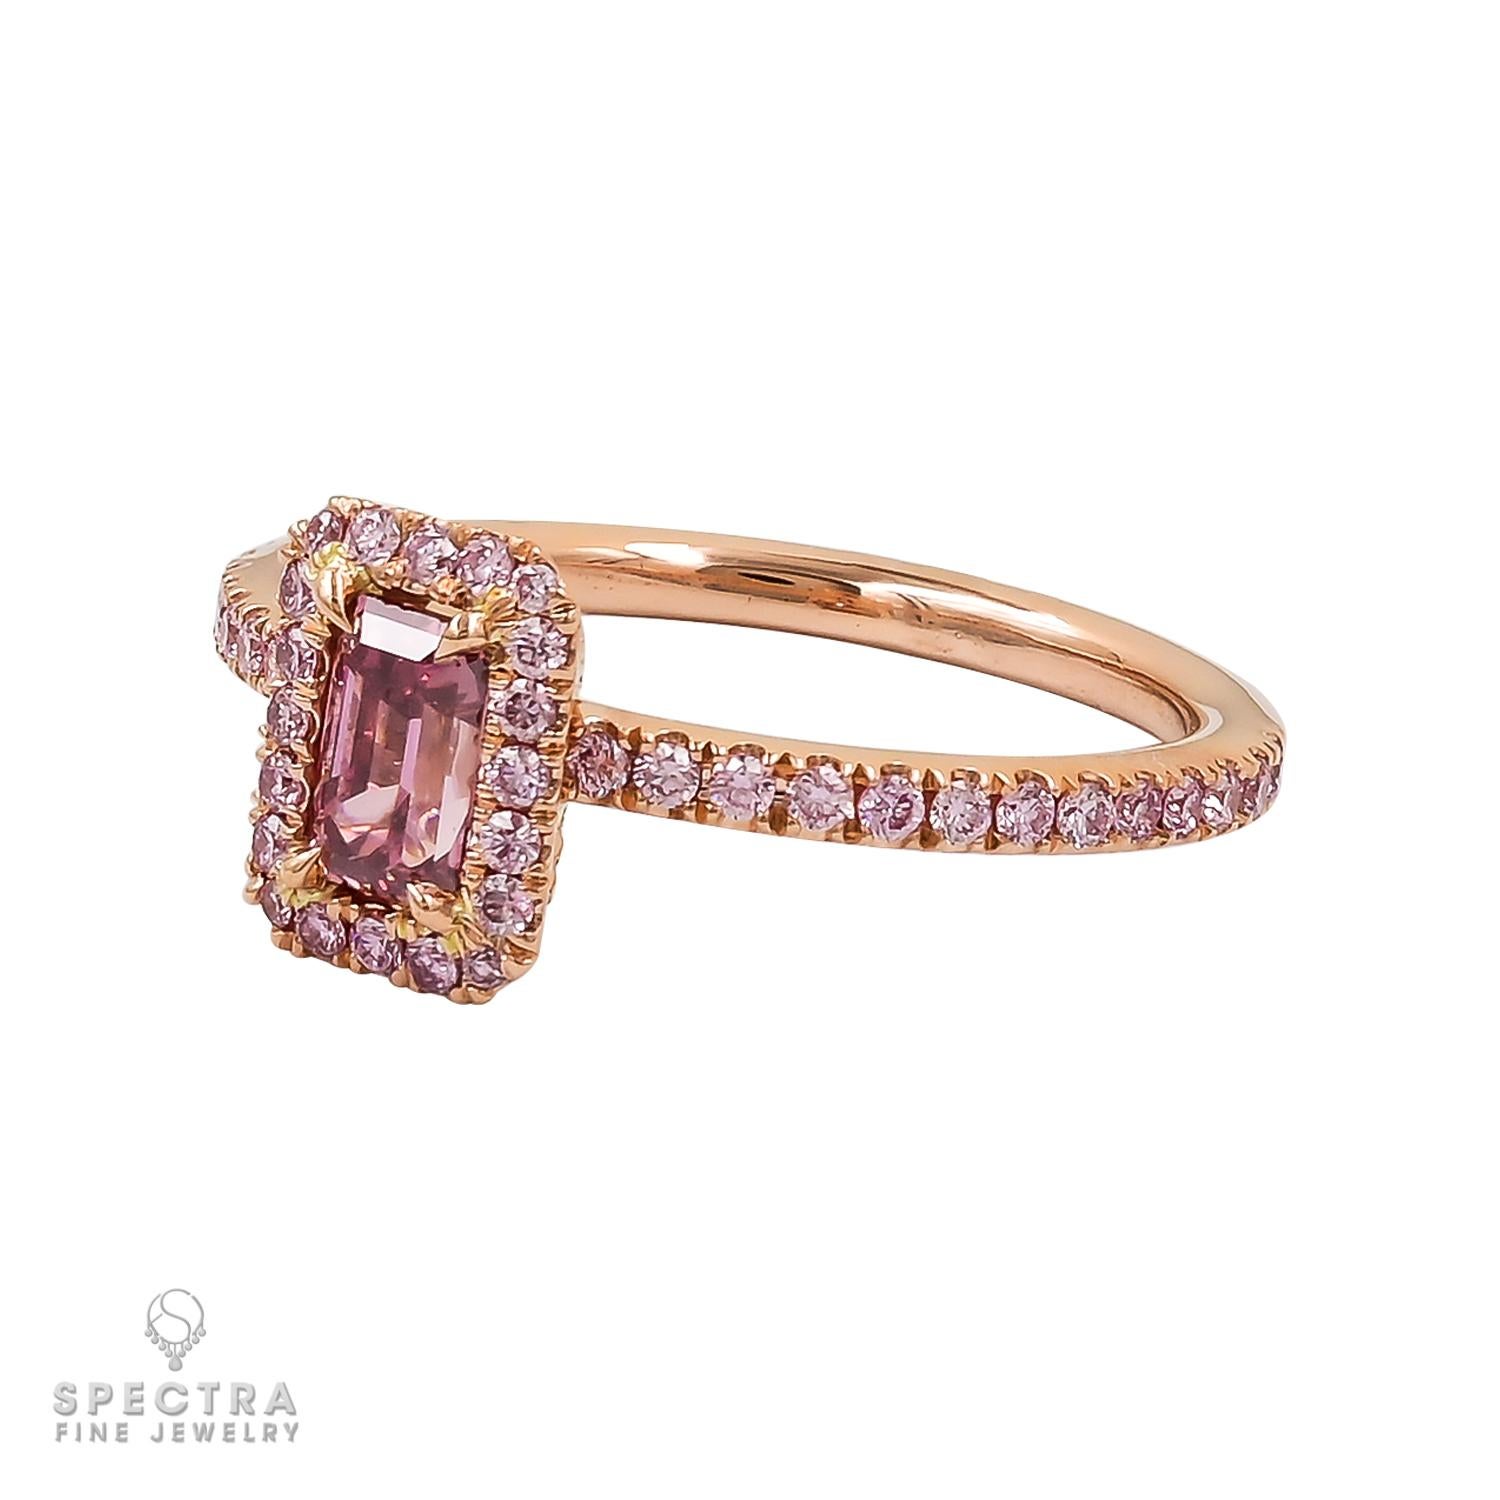 Introducing a tale of love woven into every glimmer! Behold the sublime emblem of eternal love – the enchanting engagement ring crafted by De Beers!
At the core of this masterpiece resides a 0.44-carat fancy vivid pink diamond, effusing the fervor